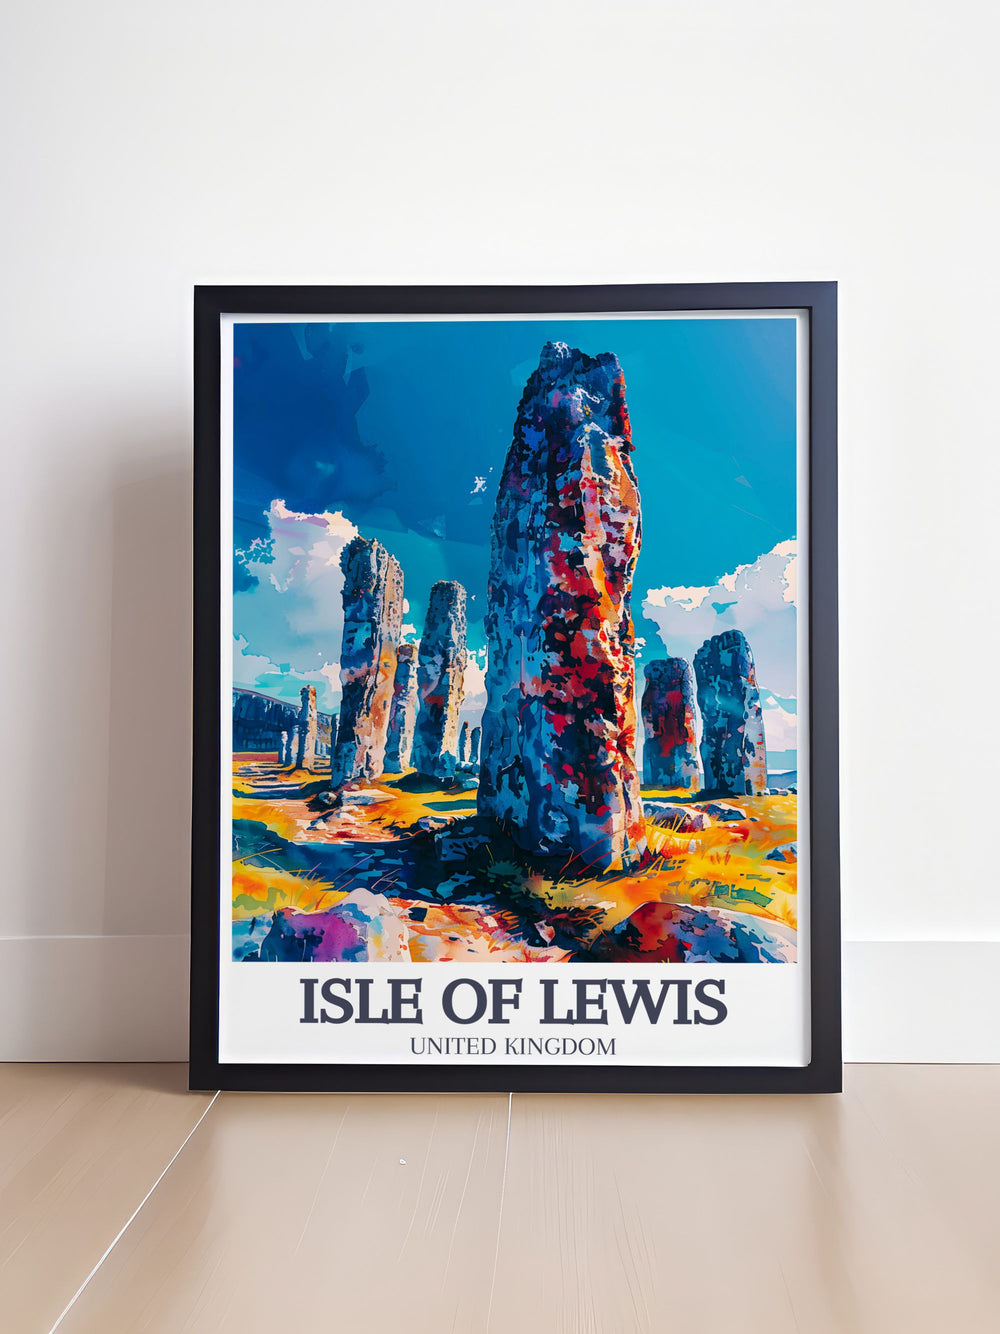 Gallery wall art featuring the Great Bernera Hills on the Isle of Lewis, with stunning views of rolling hills and the Atlantic Ocean, perfect for enhancing any nature themed interior.